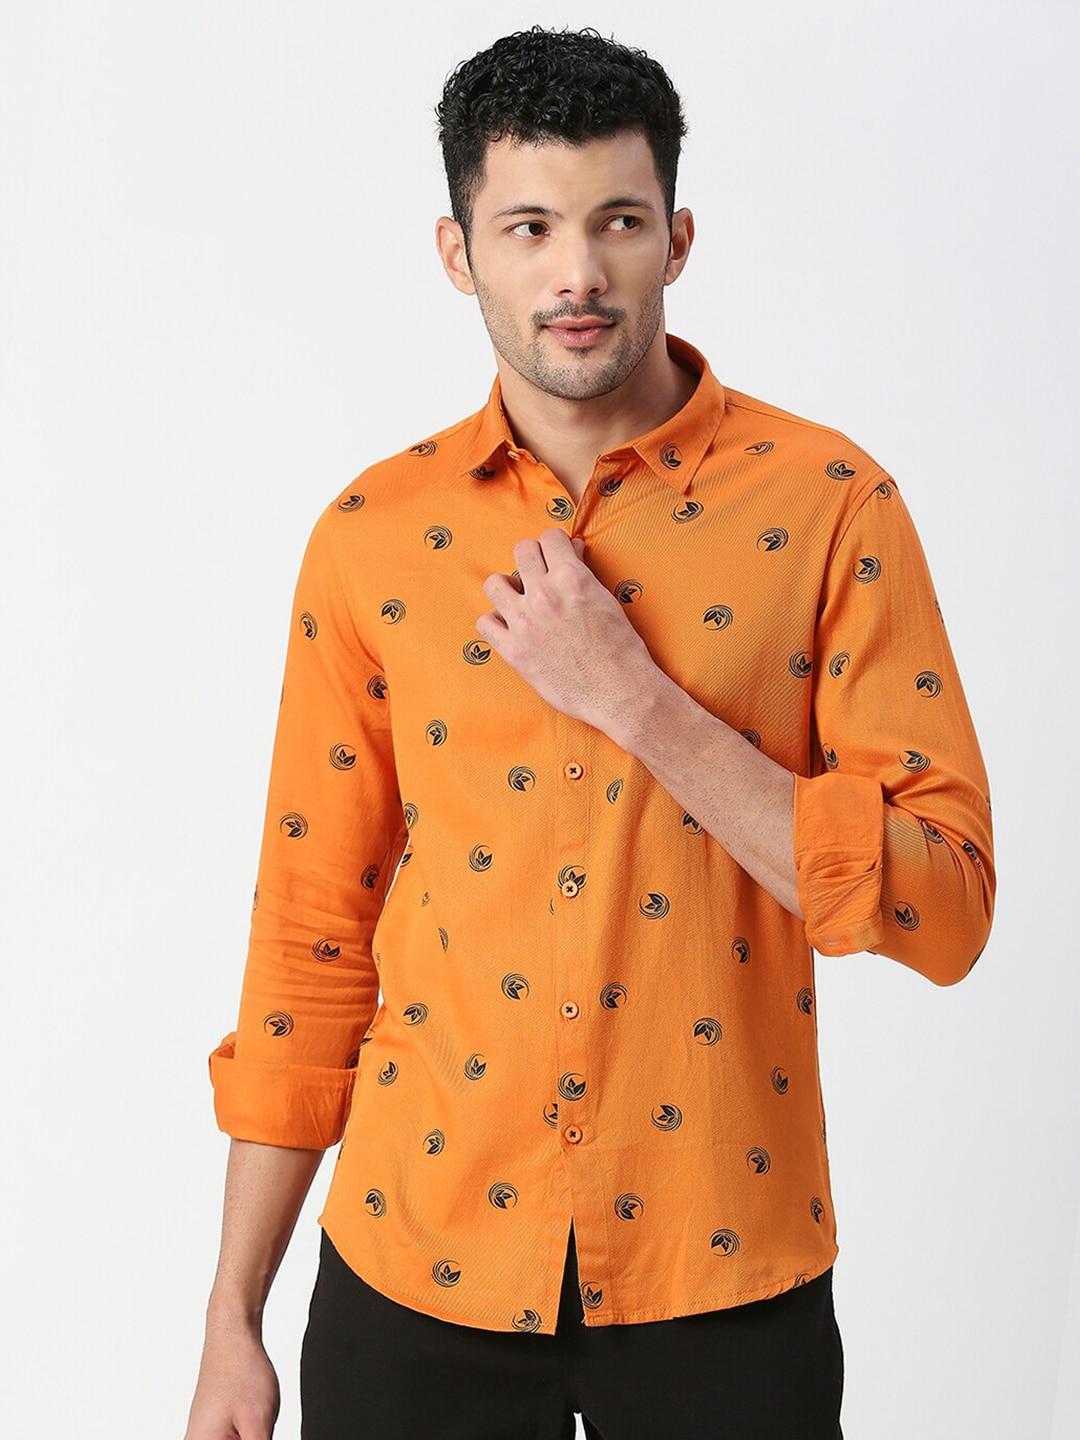 snx-printed-pure-cotton-tailored-fit-casual-shirt